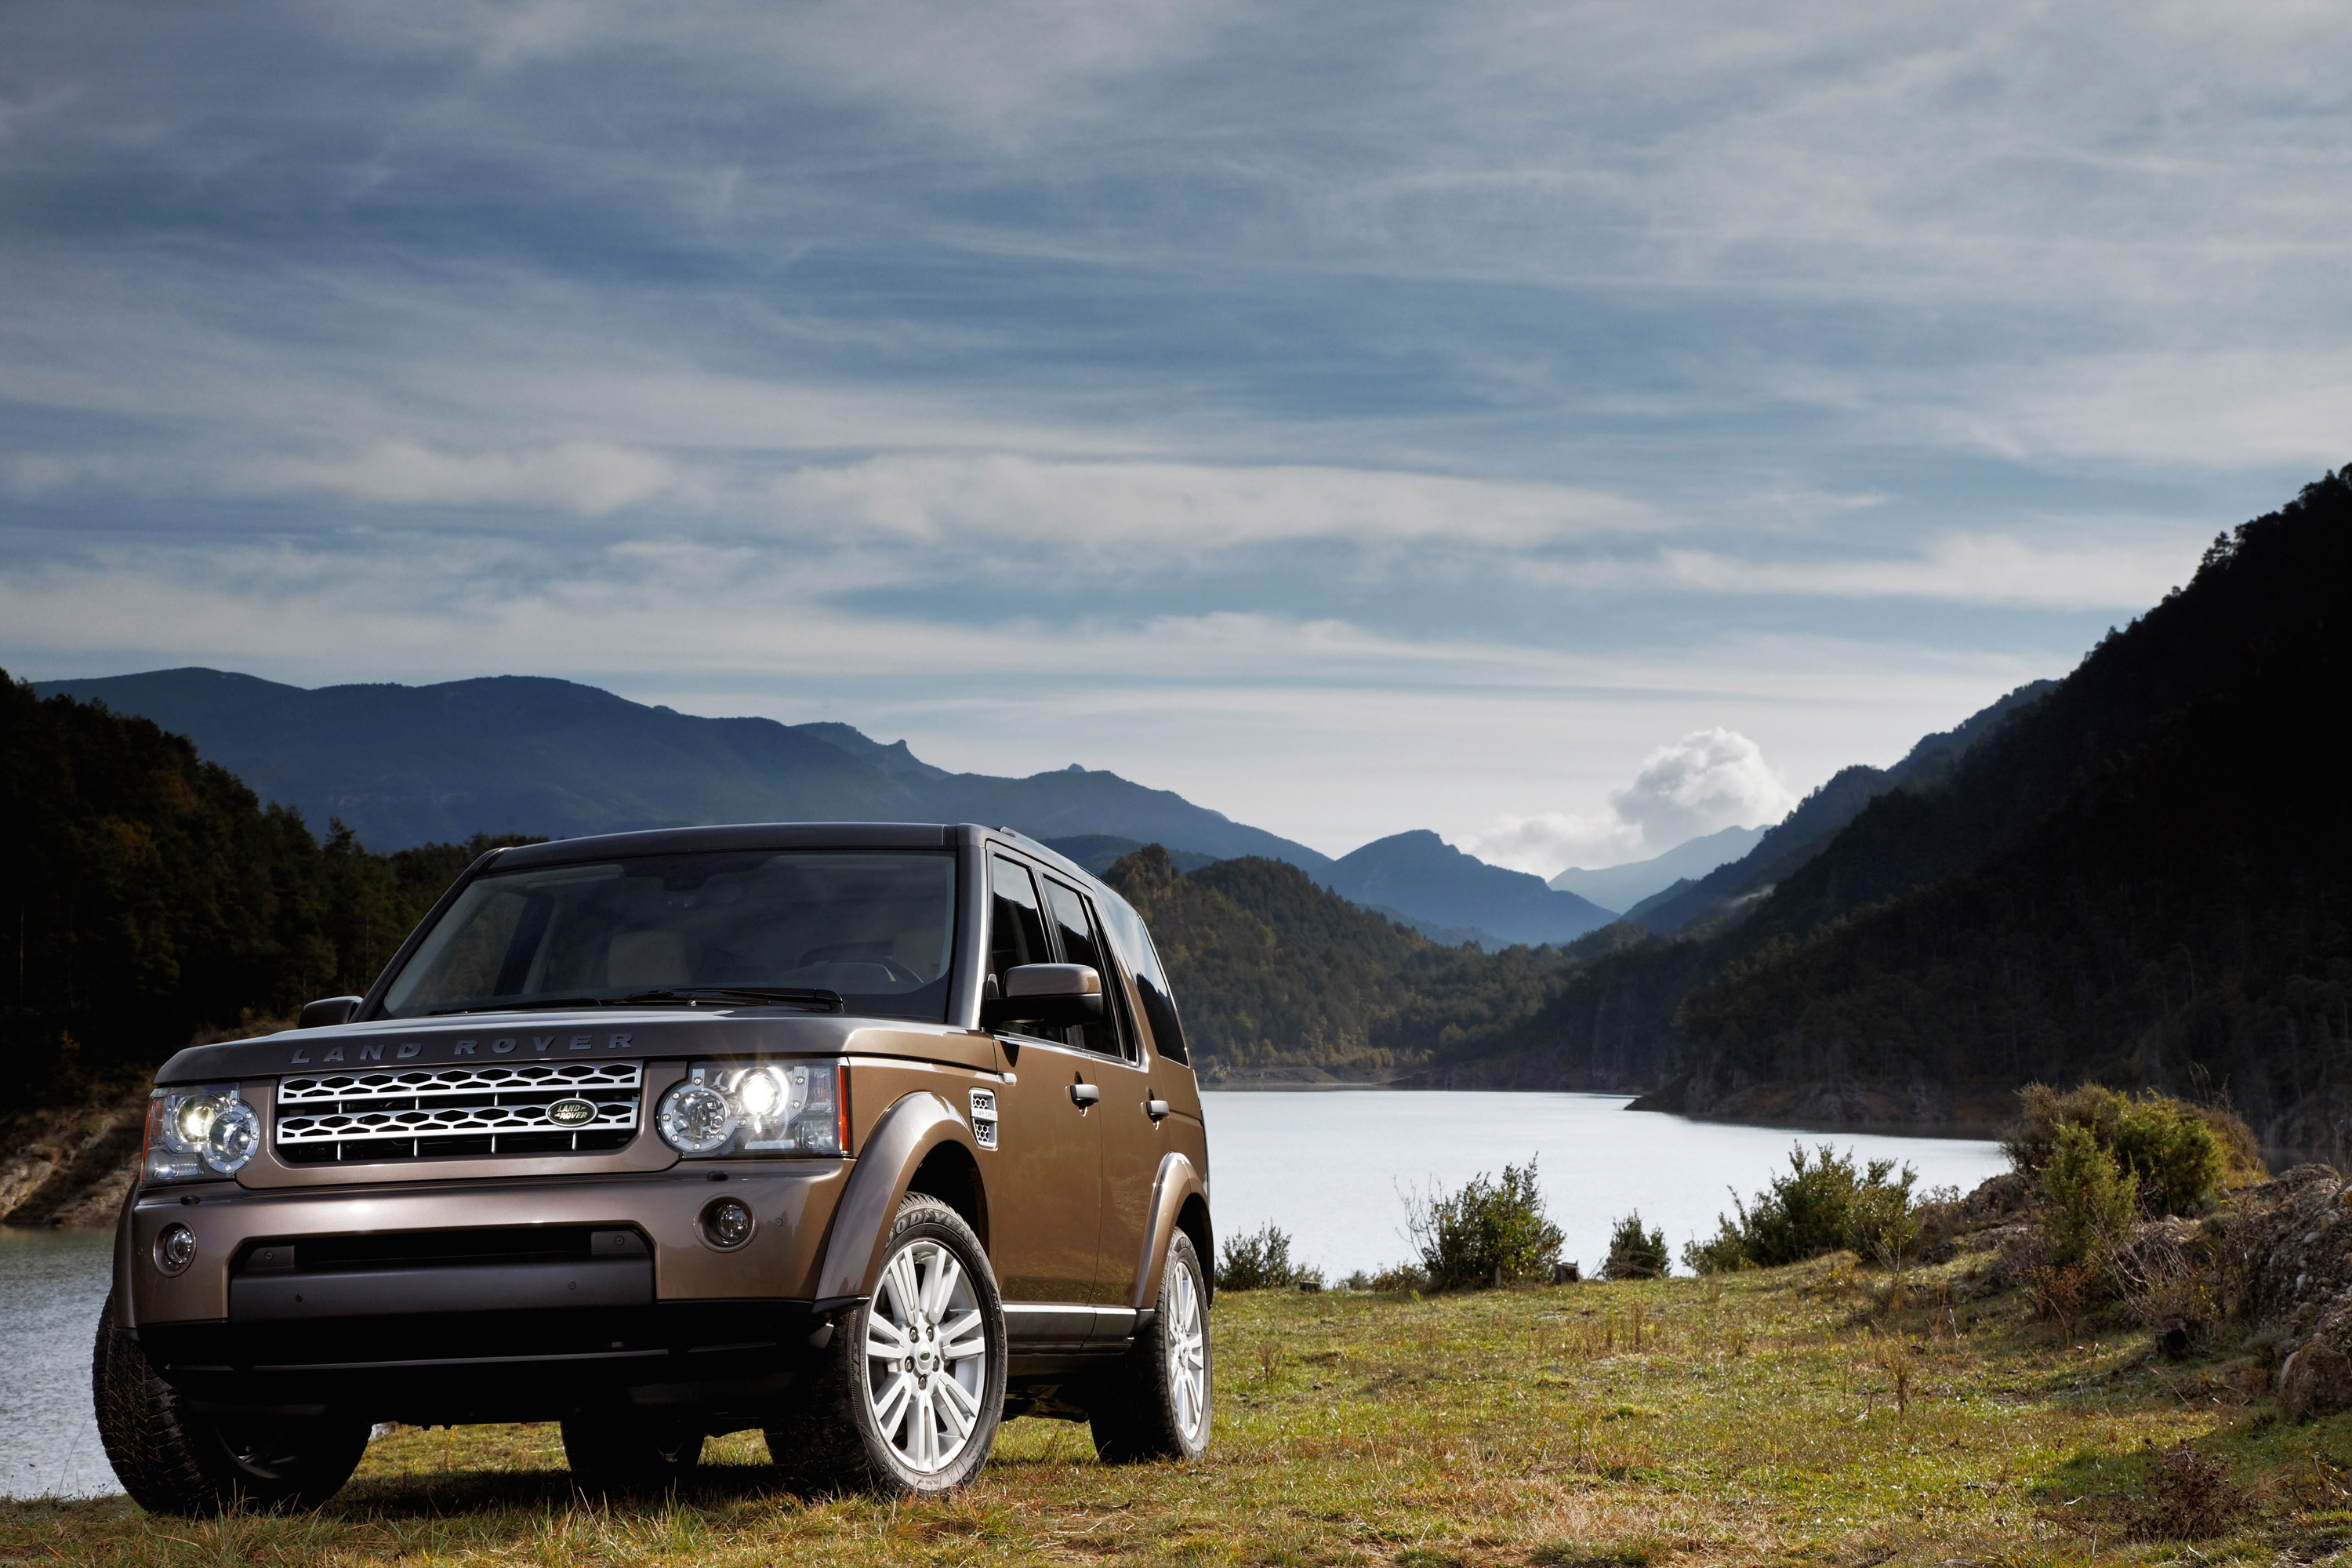 2010 Land Rover Discovery 4 - HD Pictures @ carsinvasion.com